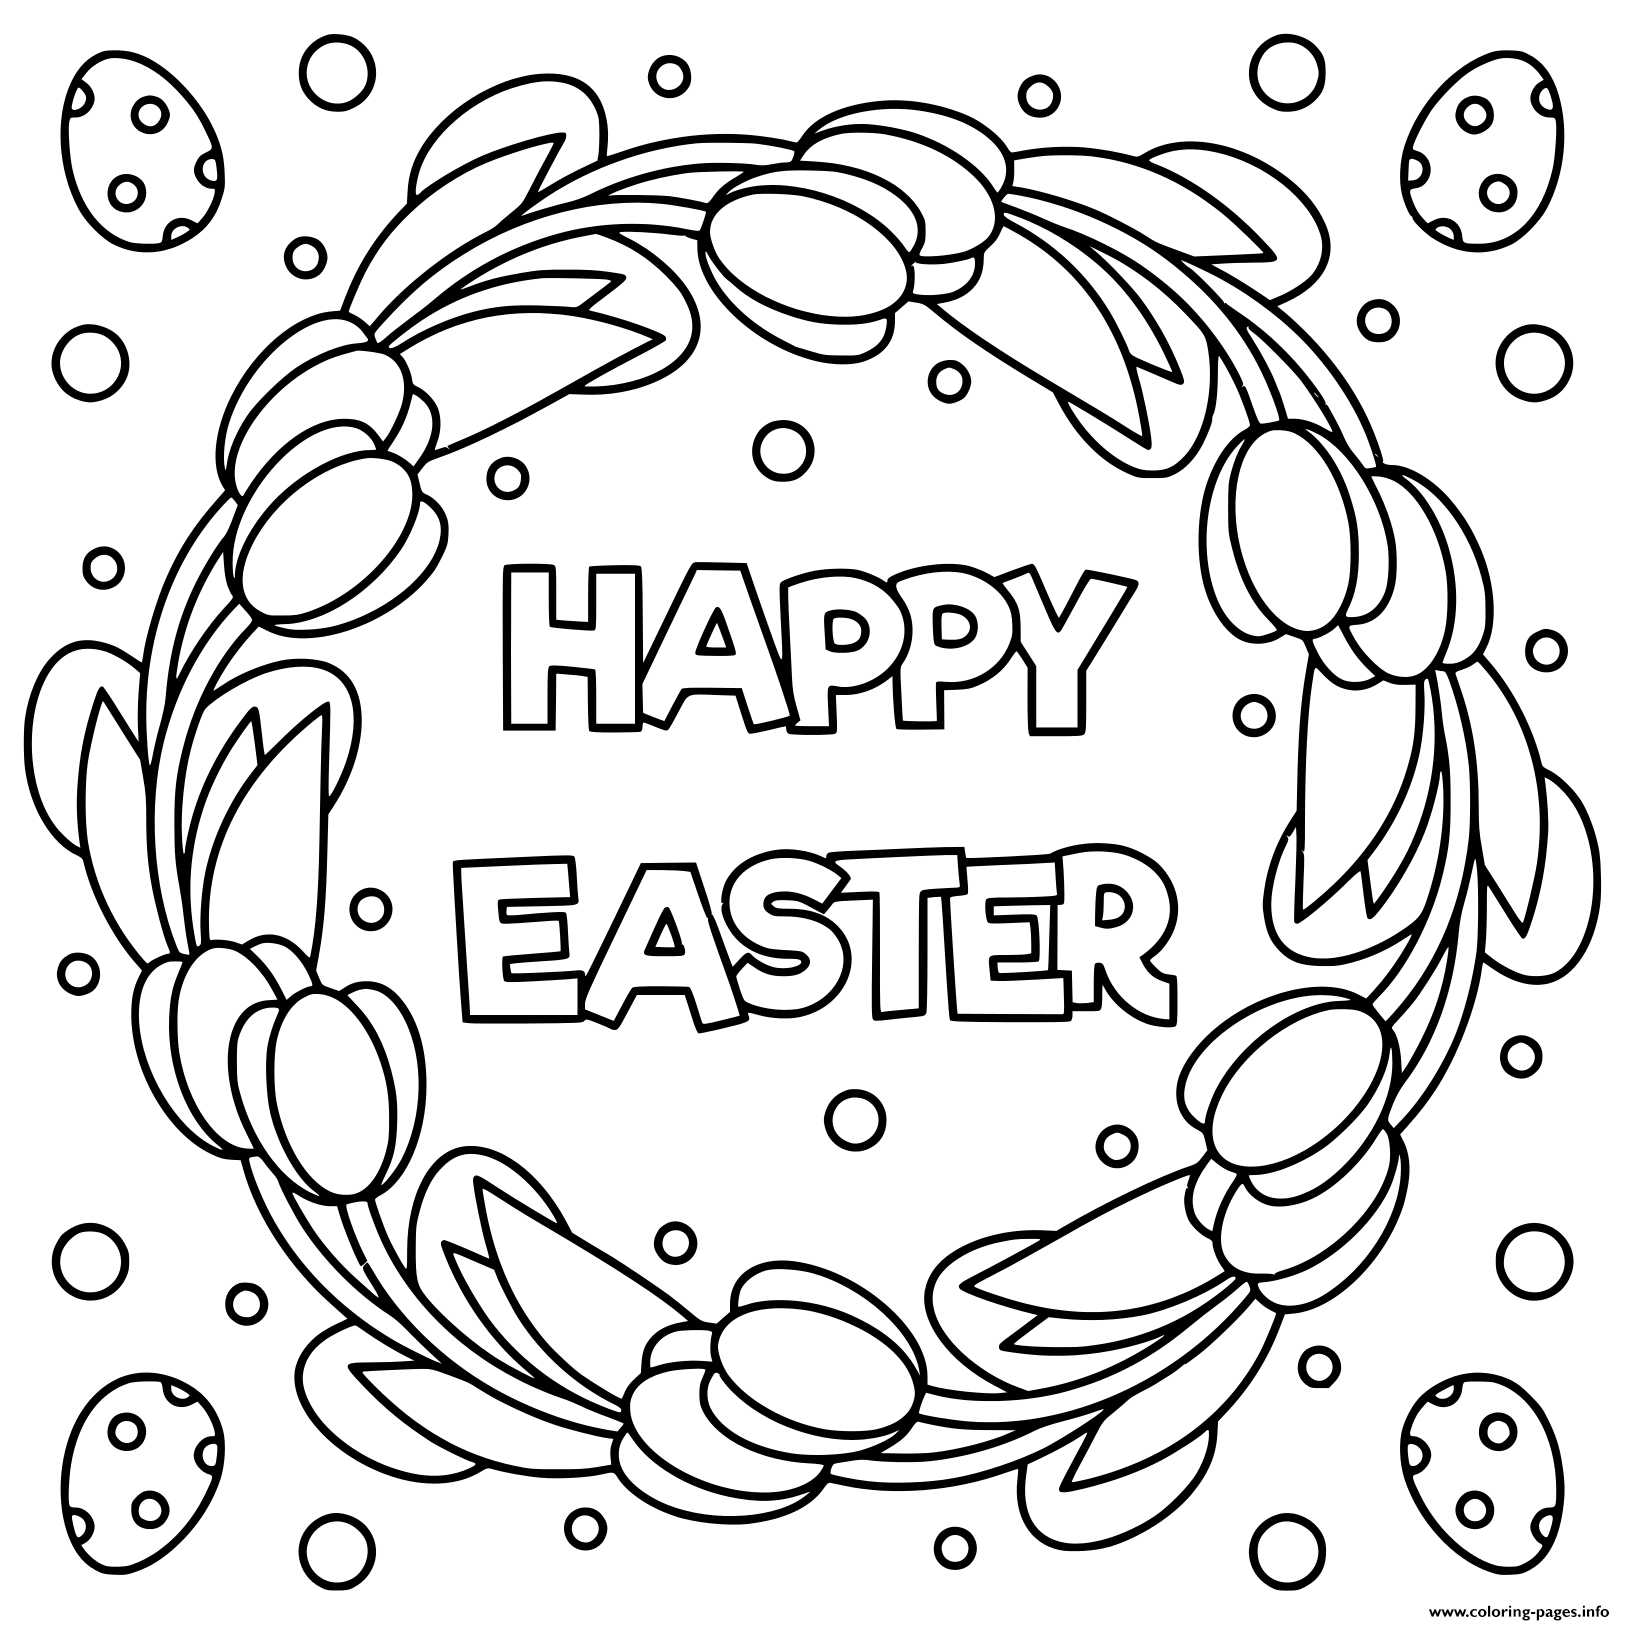 Happy Easter Black And White Illustration  coloring